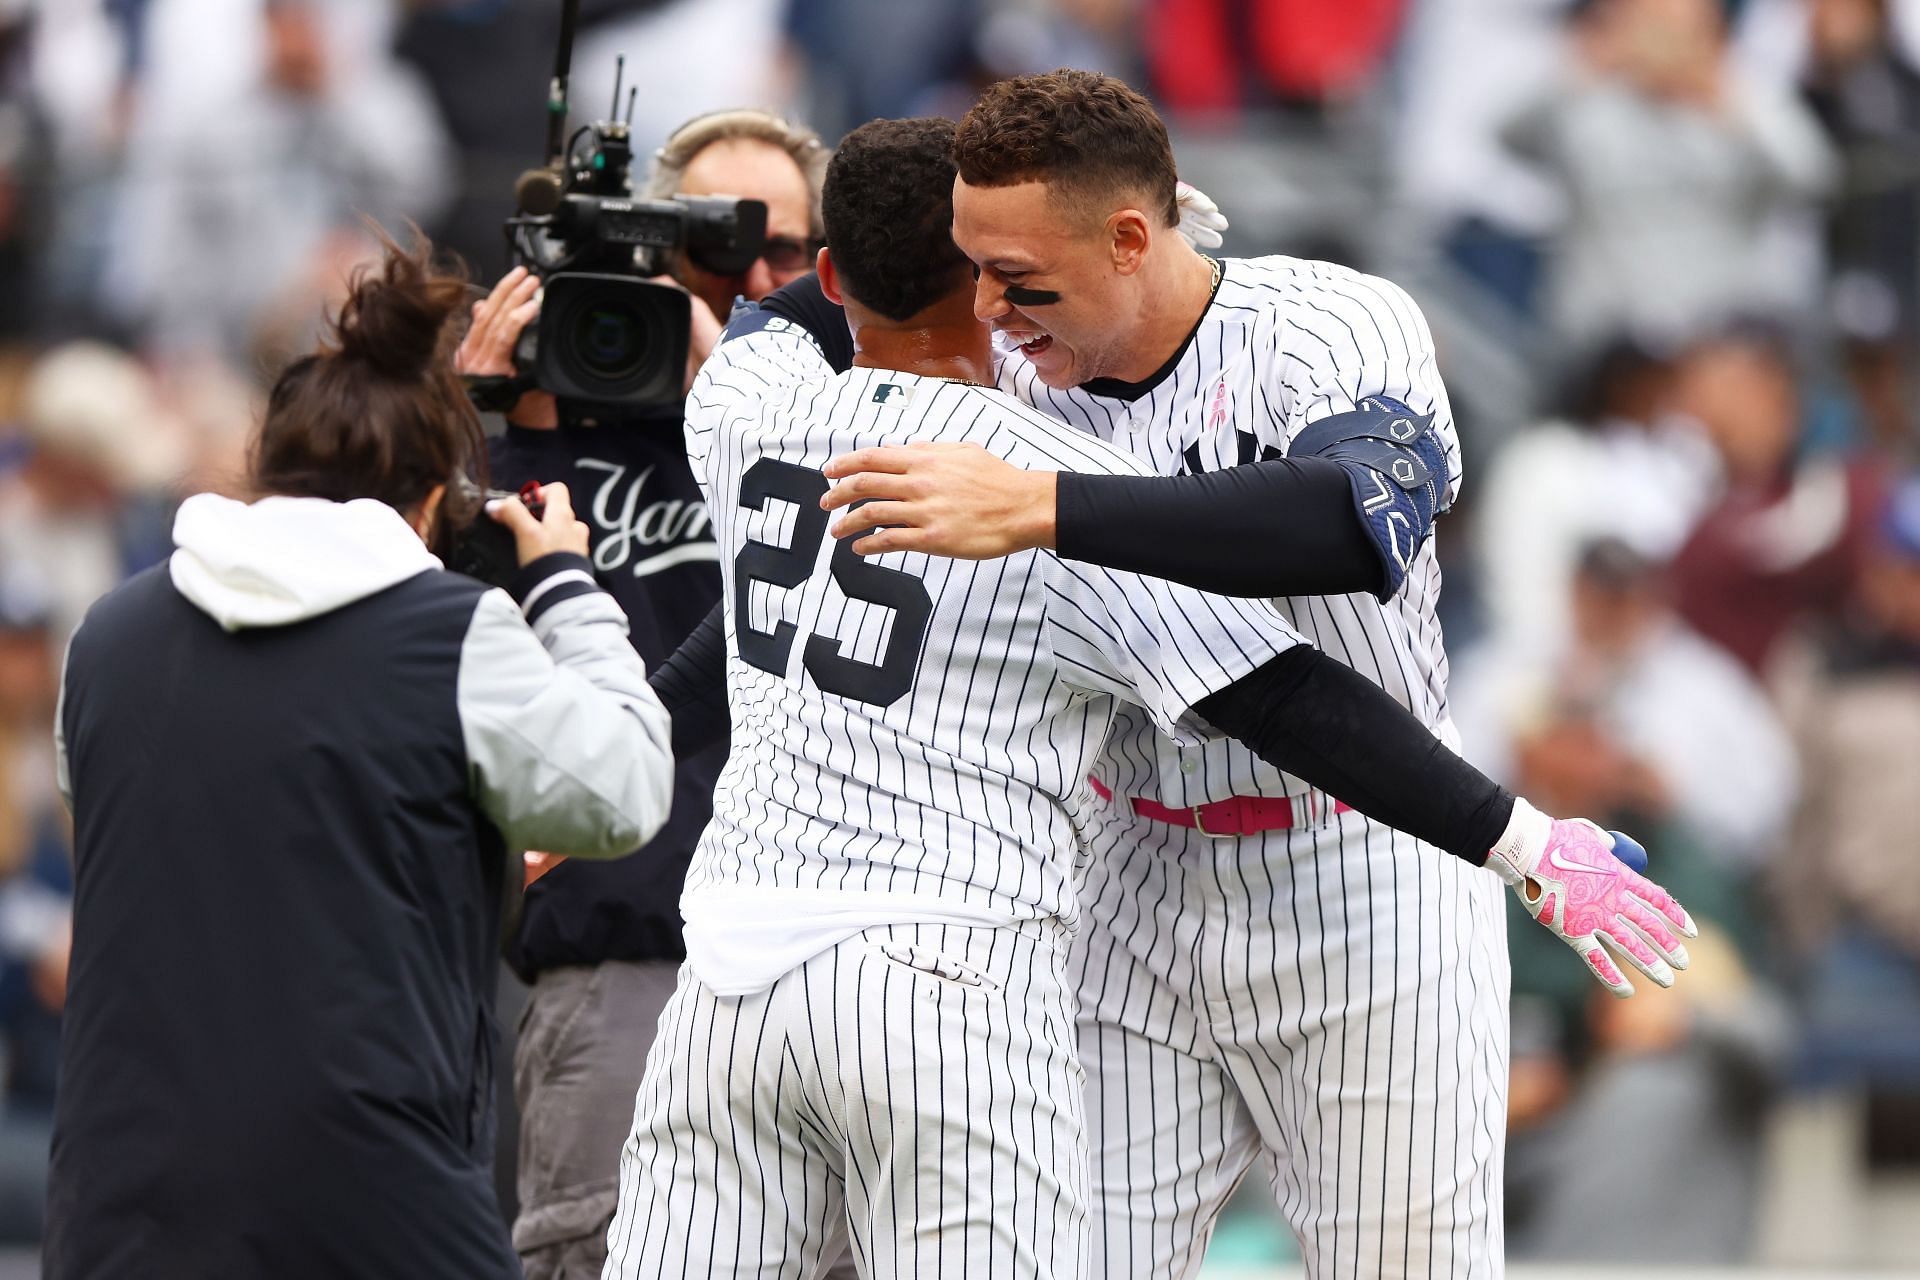 Gleyber Torres celebrates with Aaron Judge after hitting a walk-off home run against the Texas Rangers.